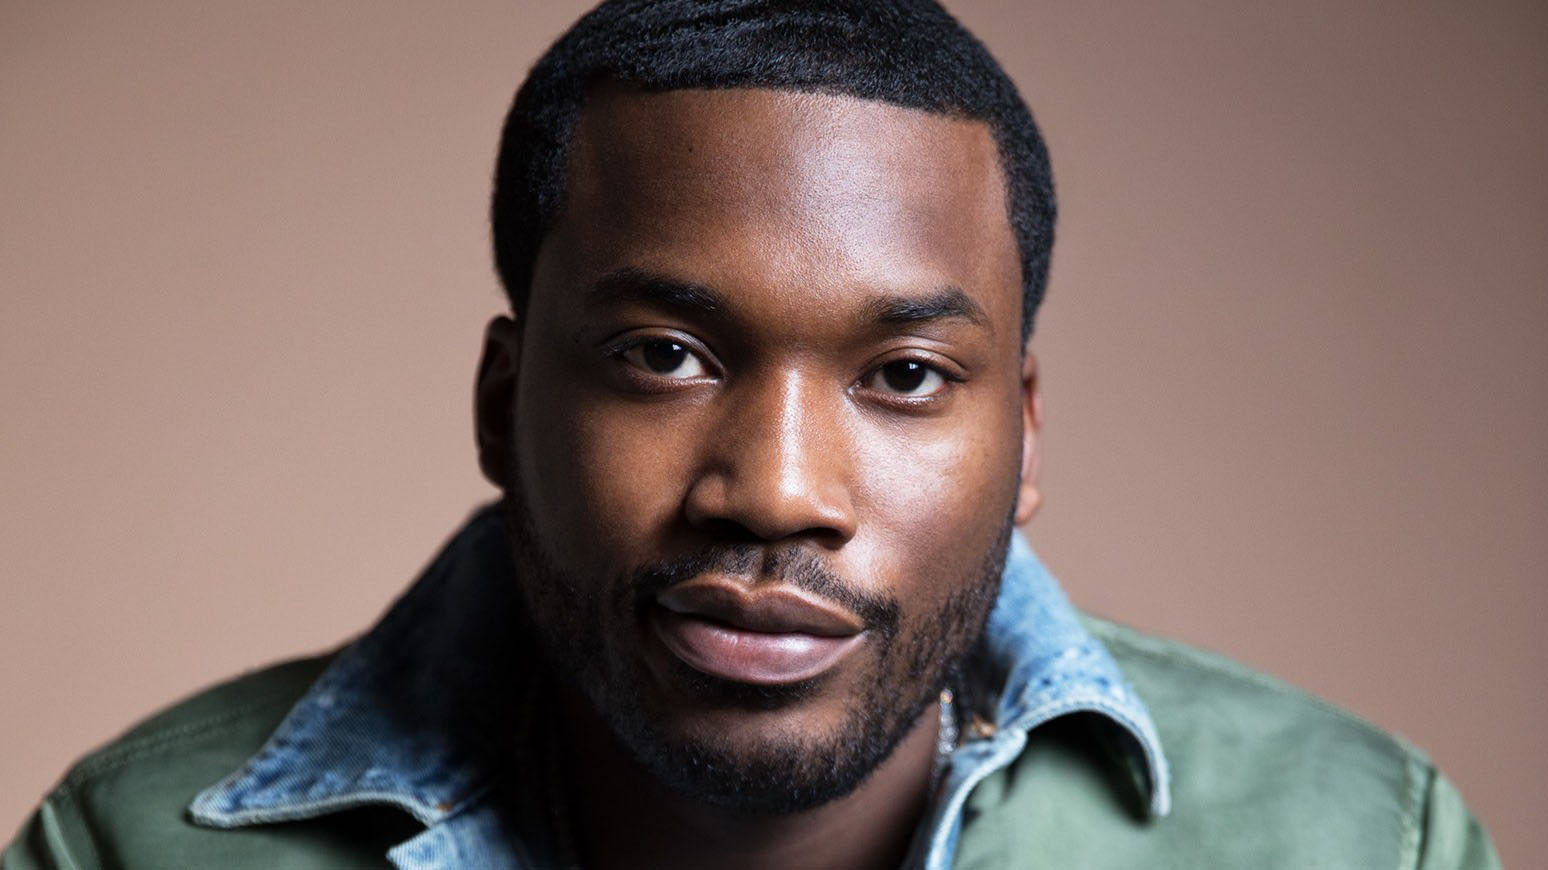 Robert Rihmeek Williams (born May 6, 1987), known professionally as Meek Mill, is an American rapper, songwriter, and activist. Born and raised in Phi...